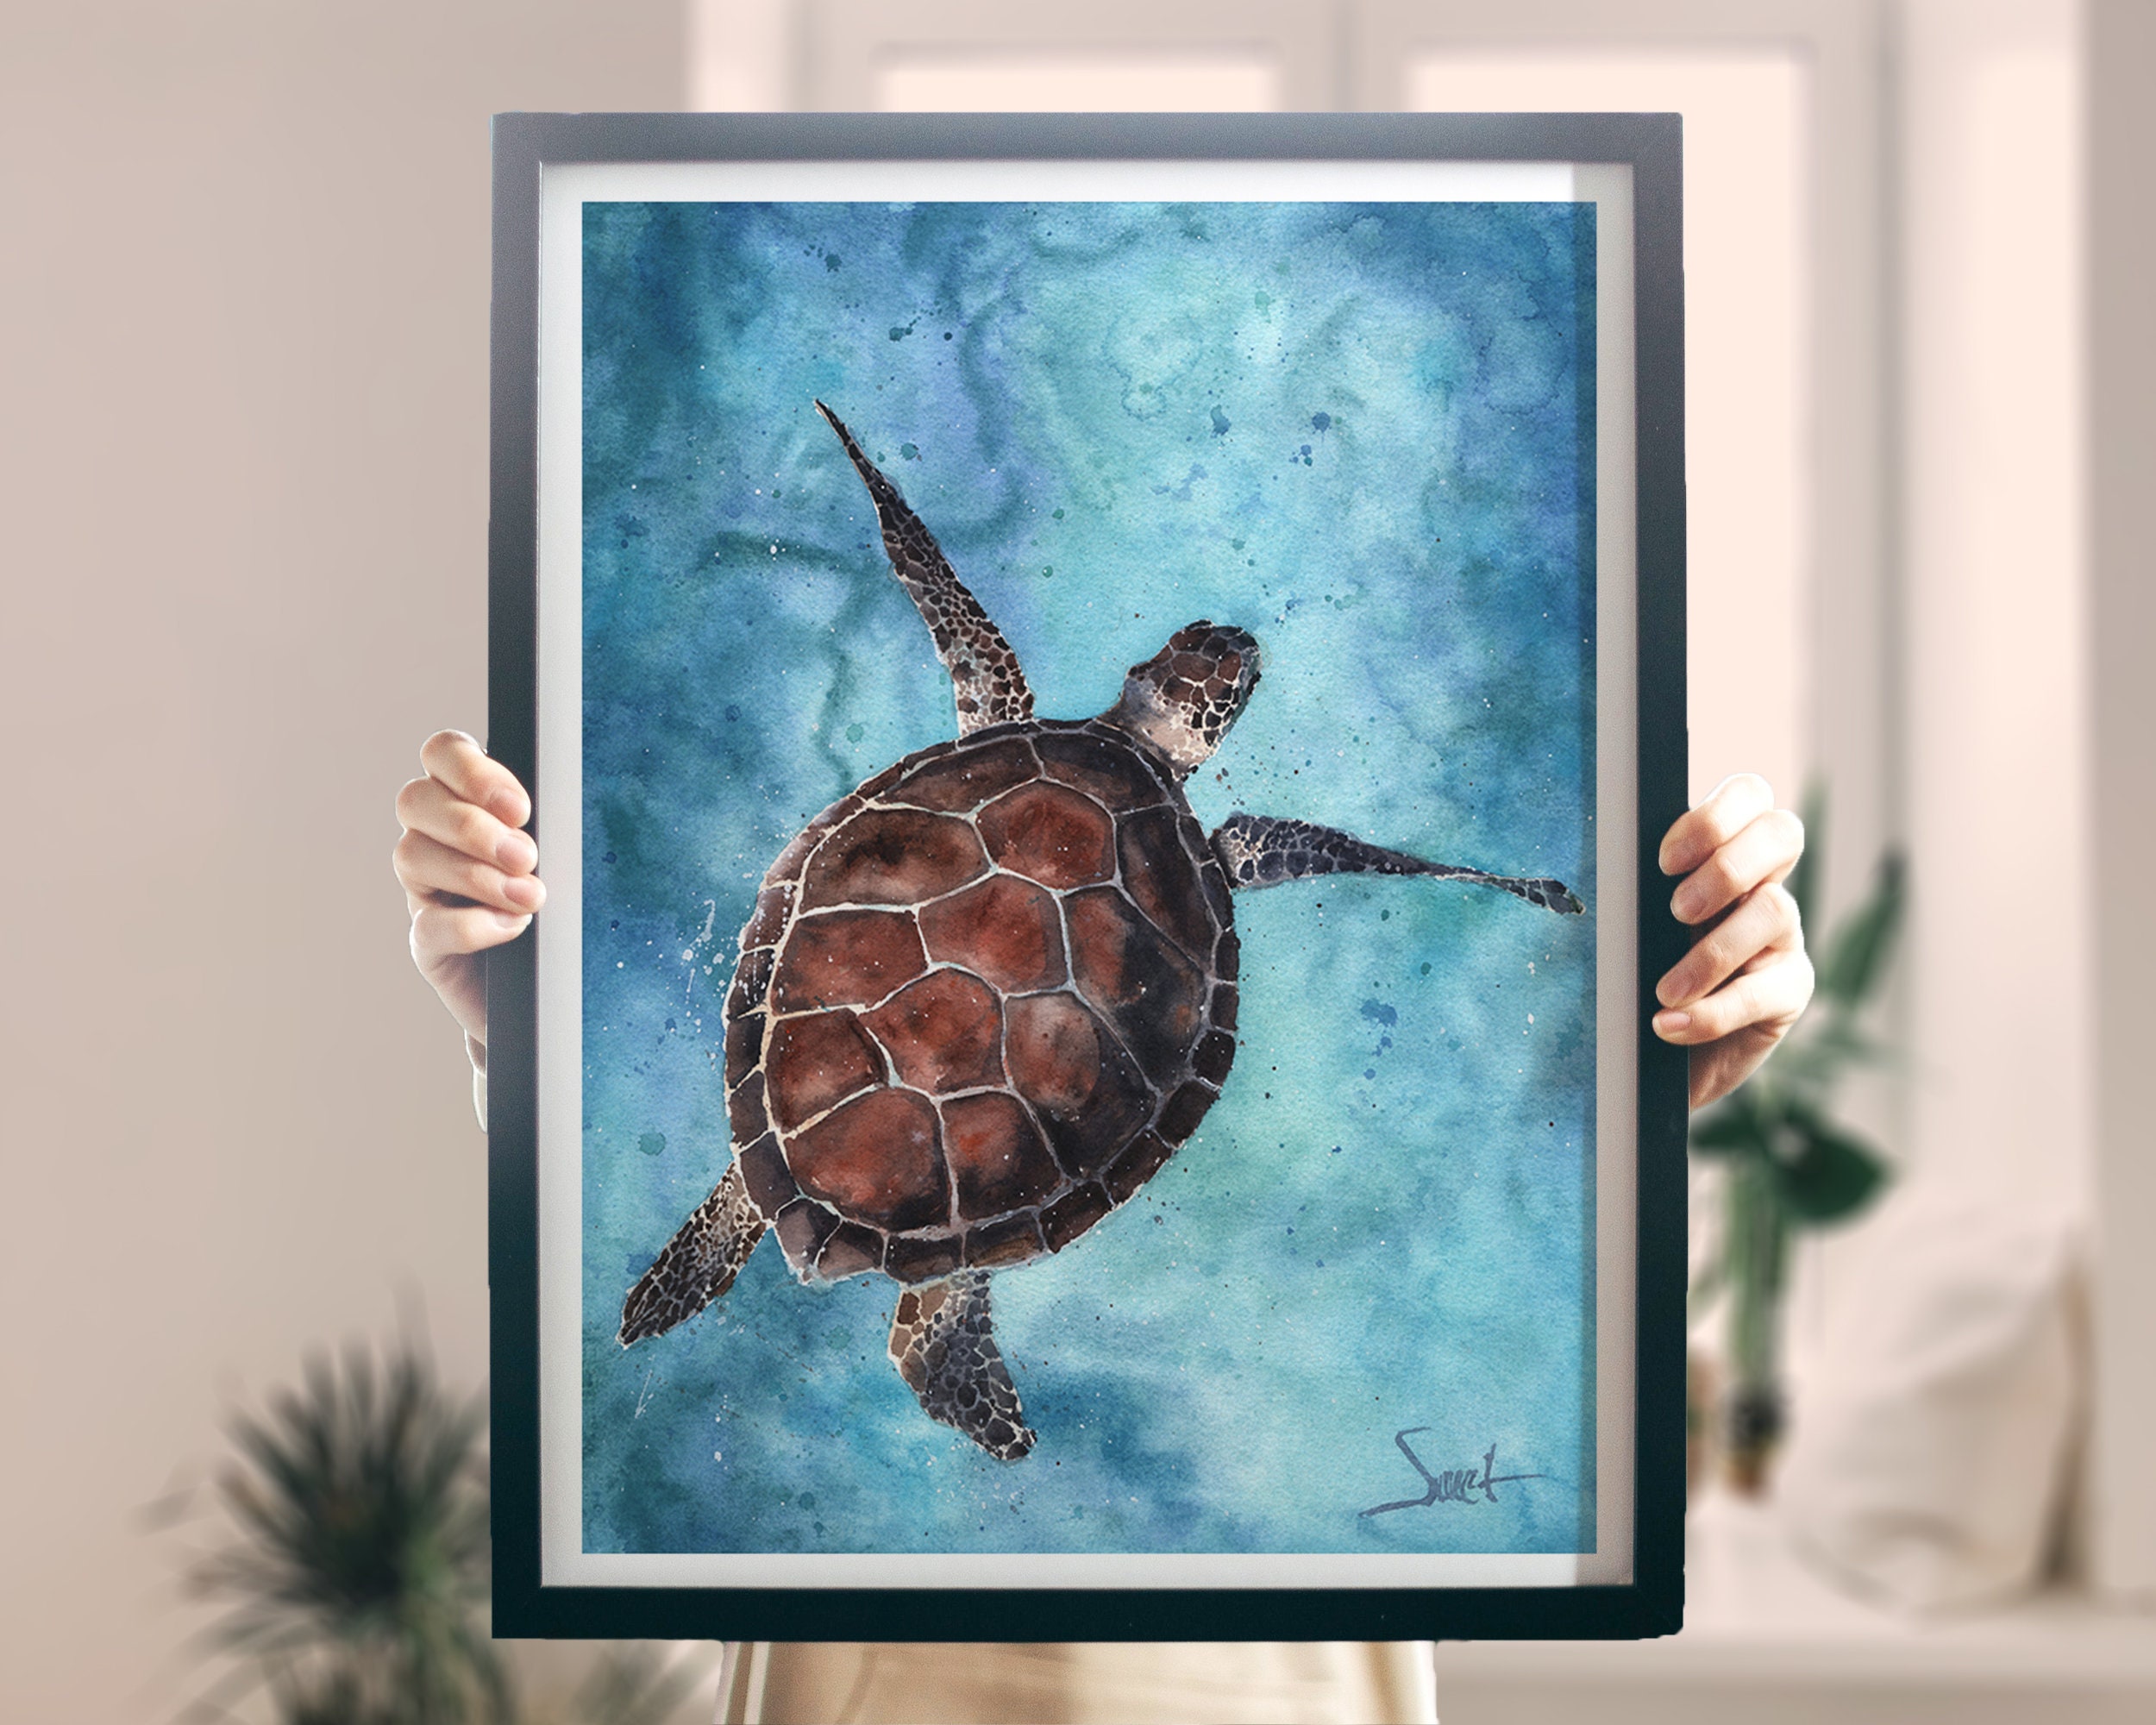 Watercolor Sea Turtle Painting Art Print by Eric Sweet | Etsy